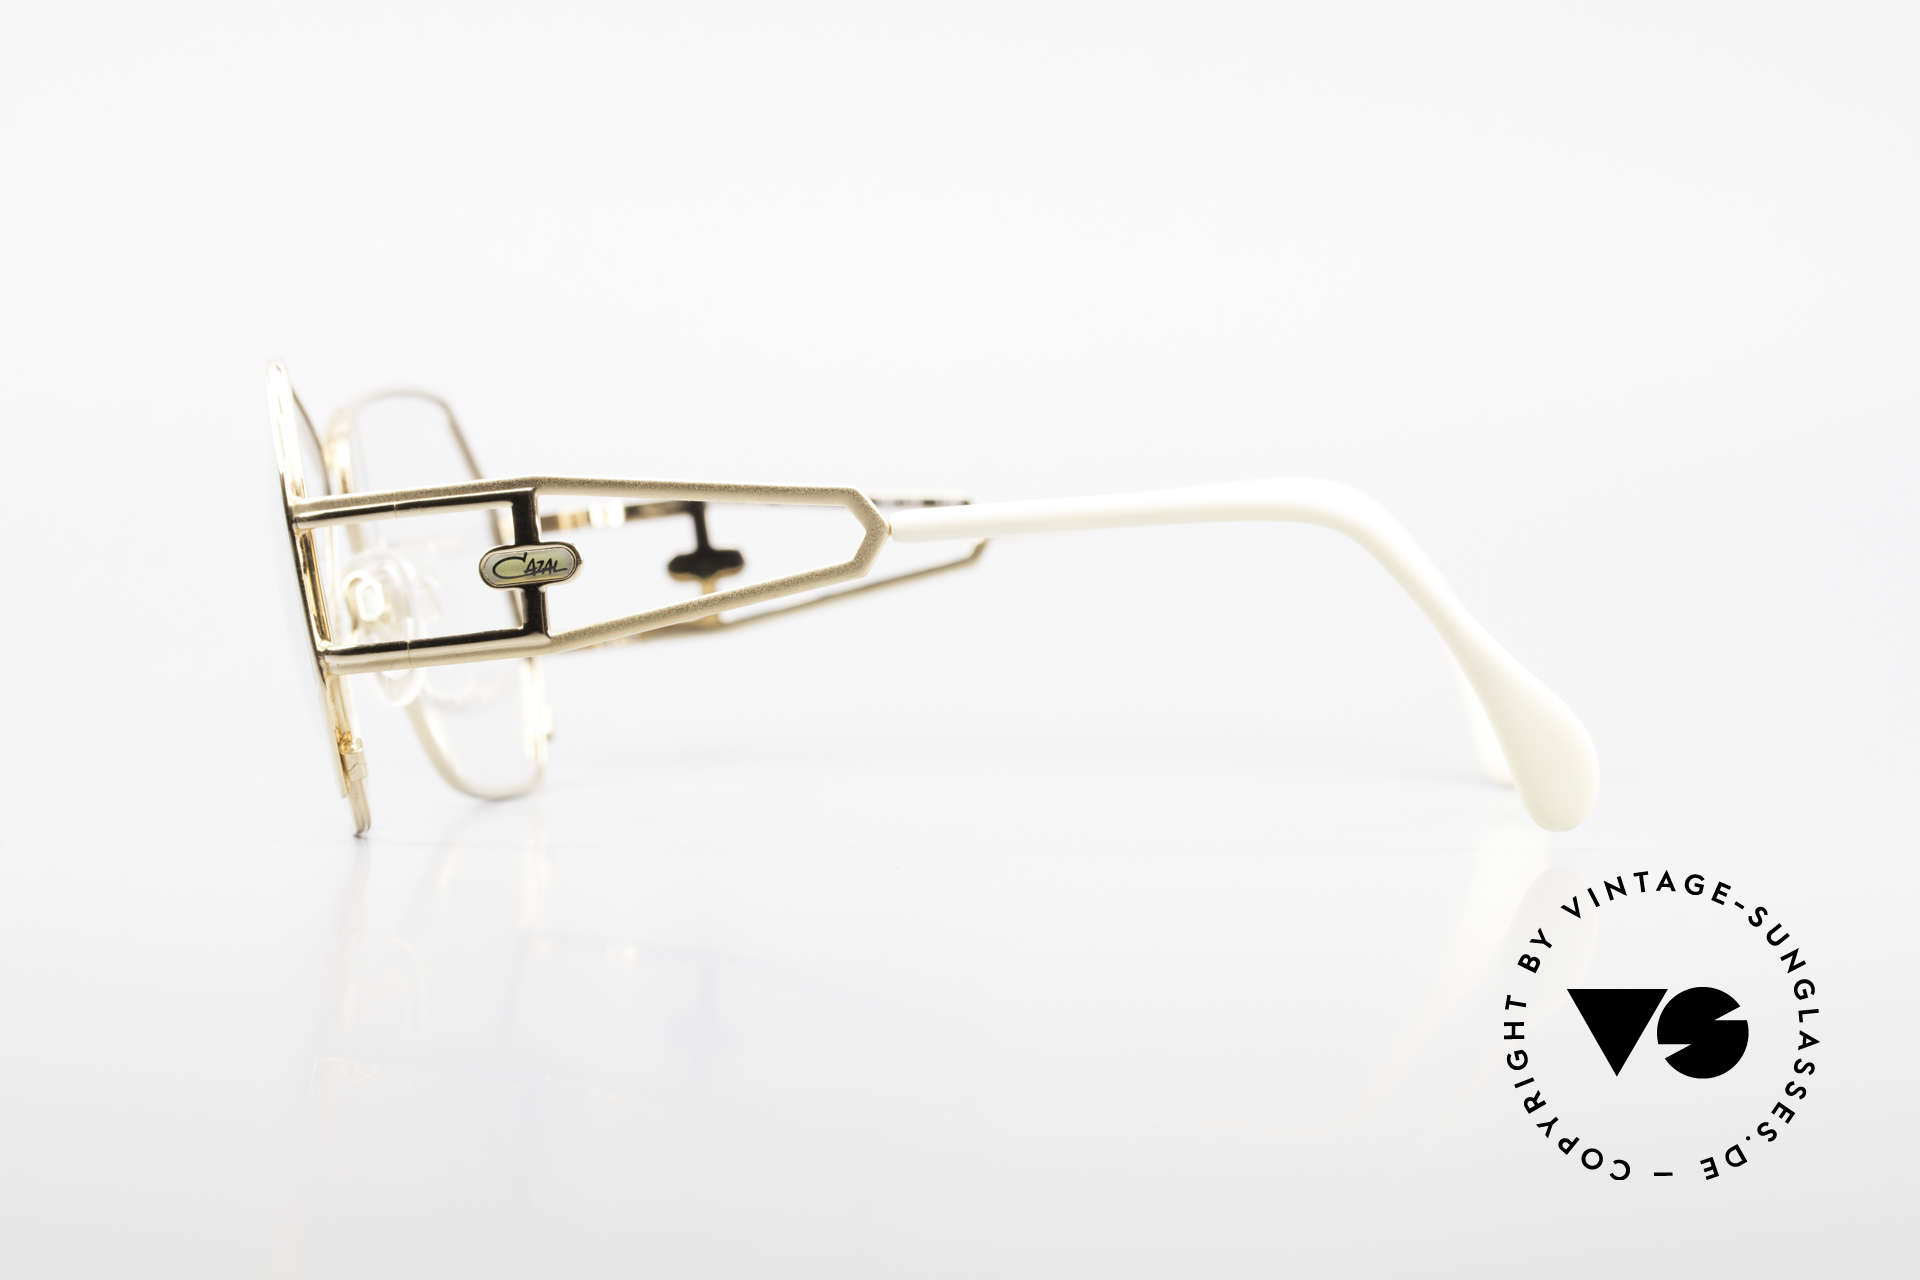 Cazal 225 Old School HipHop Frame 80's, popular HipHop accessory in the 1980's and these days, Made for Women